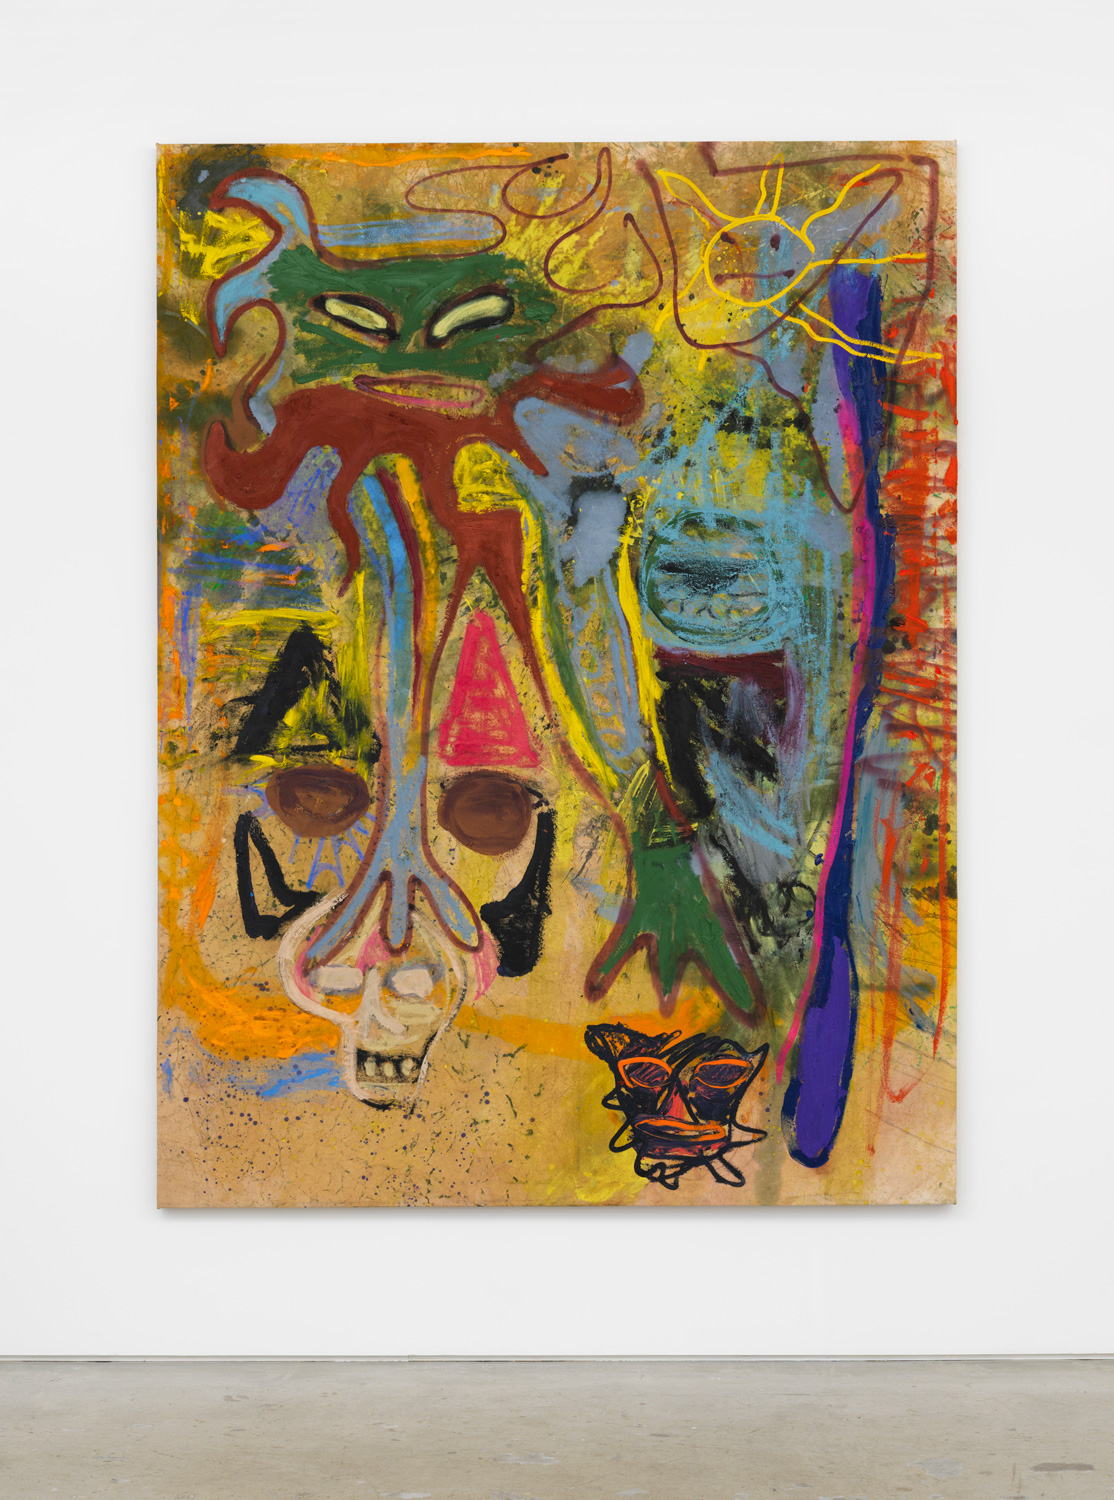 Bill Saylor, Helio, 2018, oil, flashe, oil stick, spray paint on canvas, 84h x 63w in.